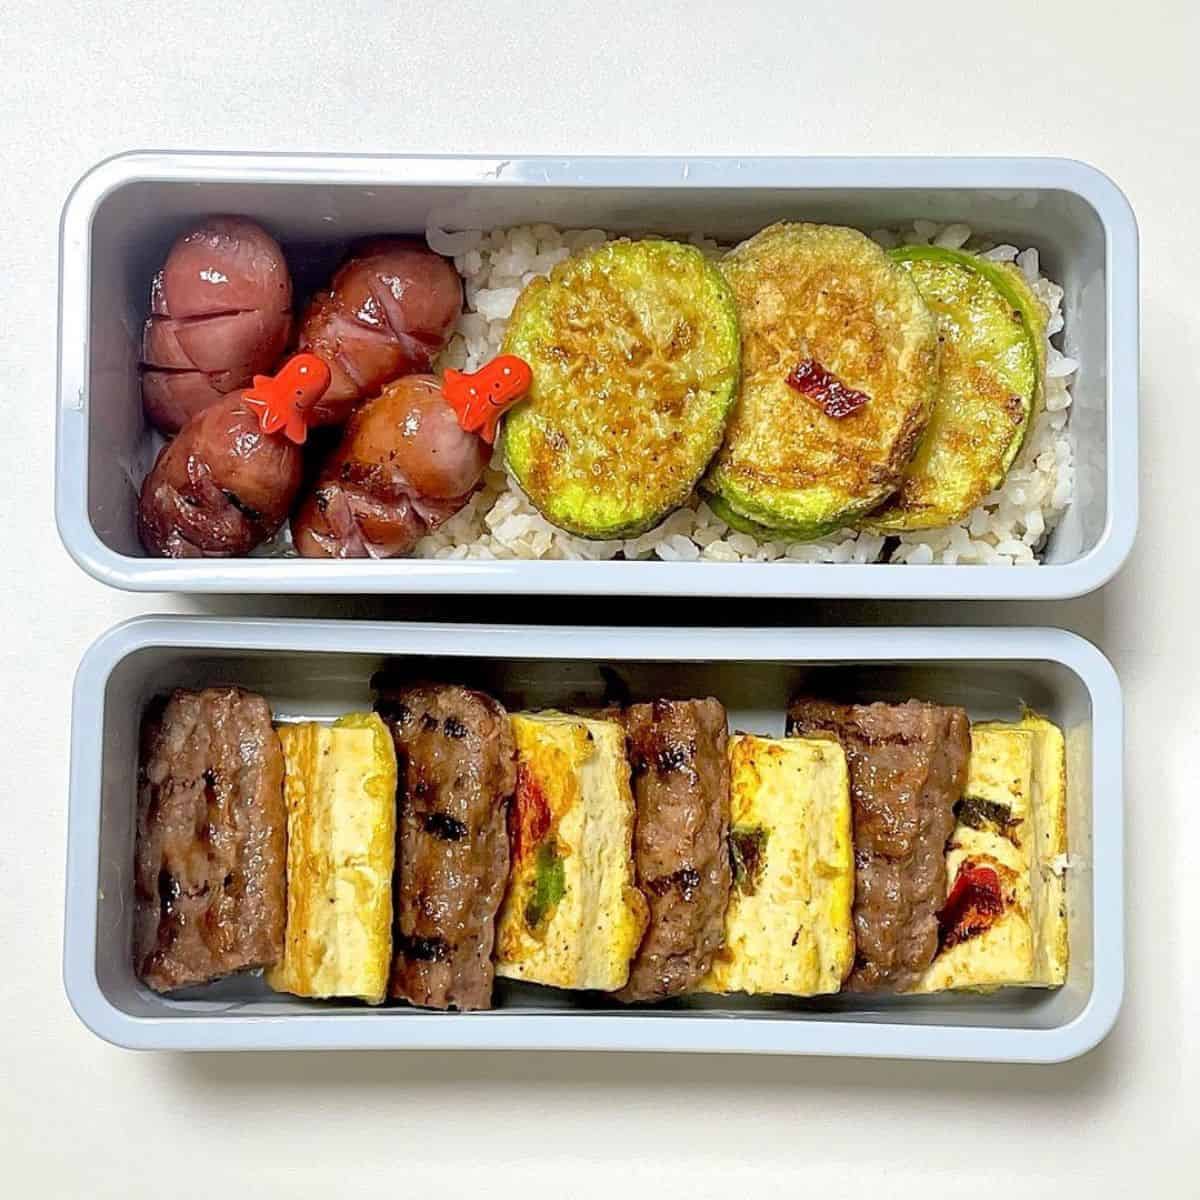 Rectangular containers with delicious food